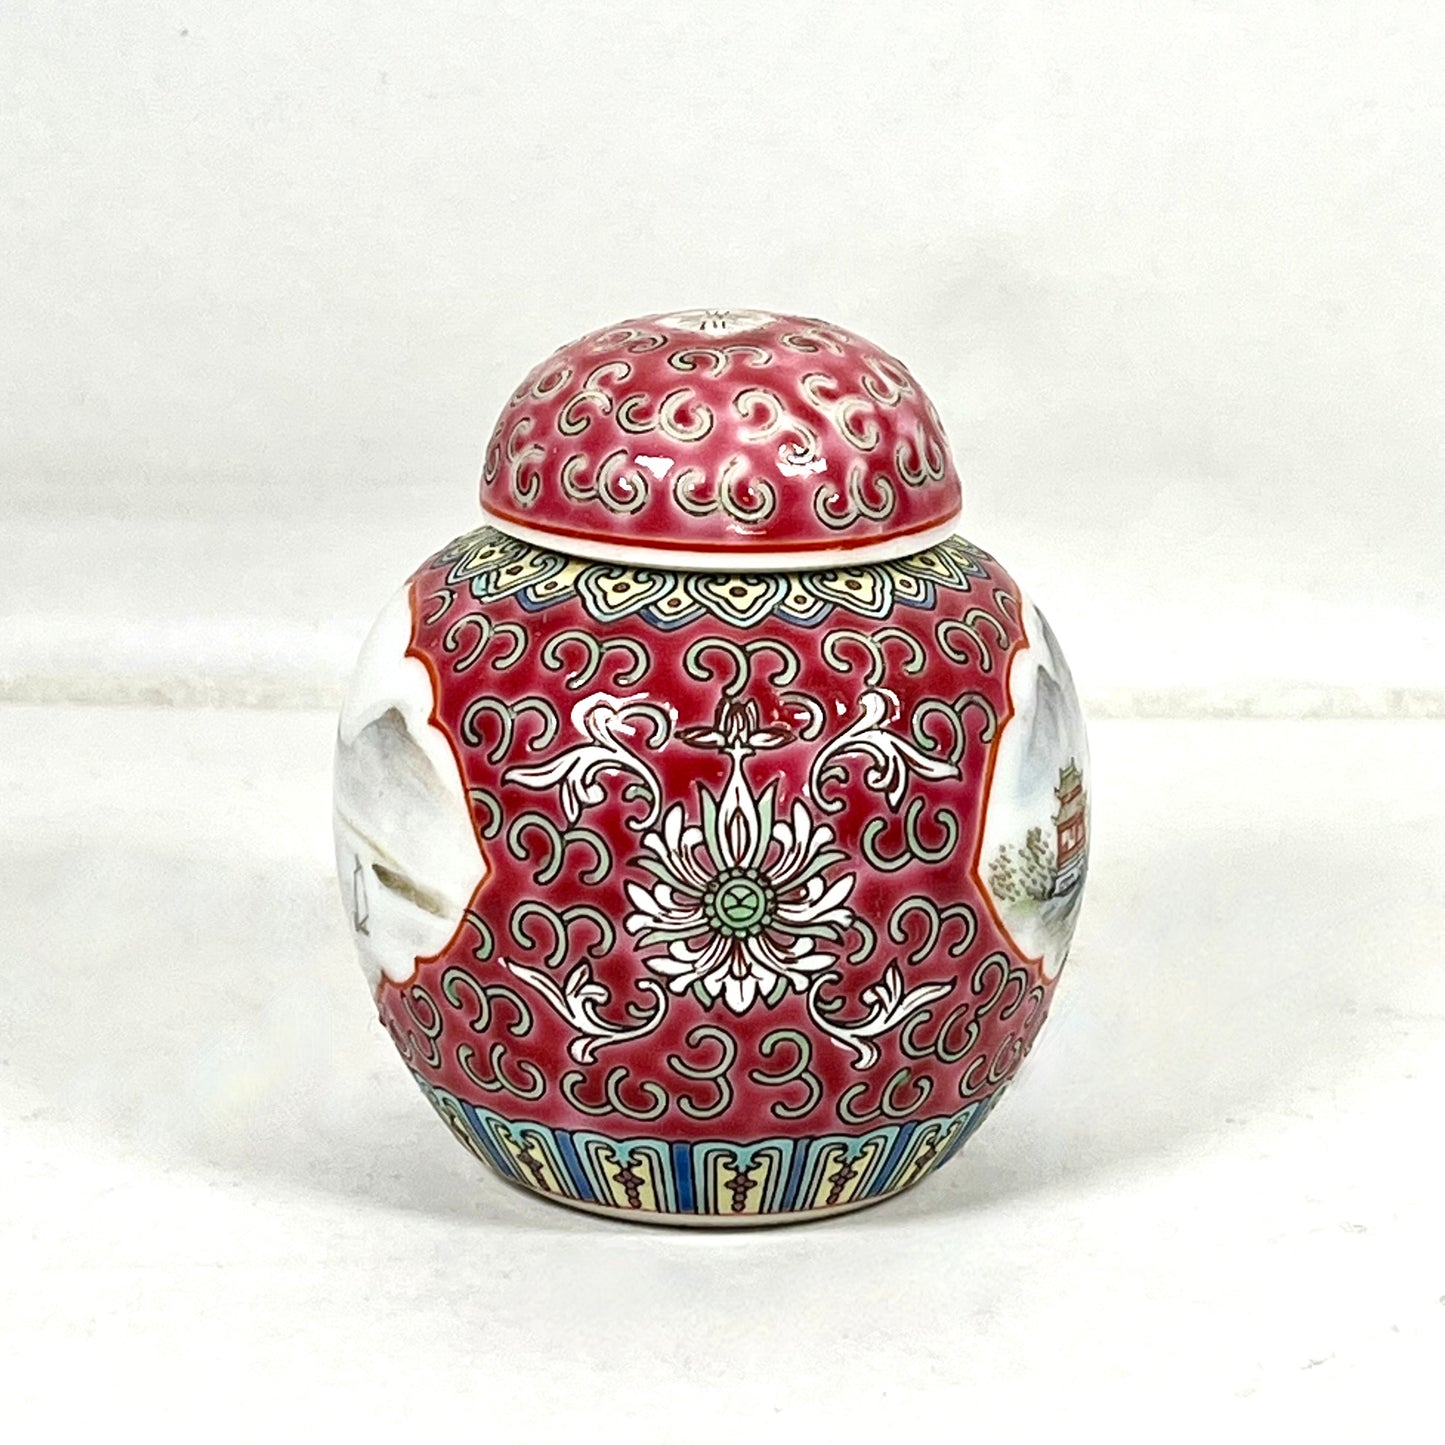 Midcentury 1960s-1980s Lidded Red Jingdezhen Ginger Jar with Hand-painted Mountain Scenes